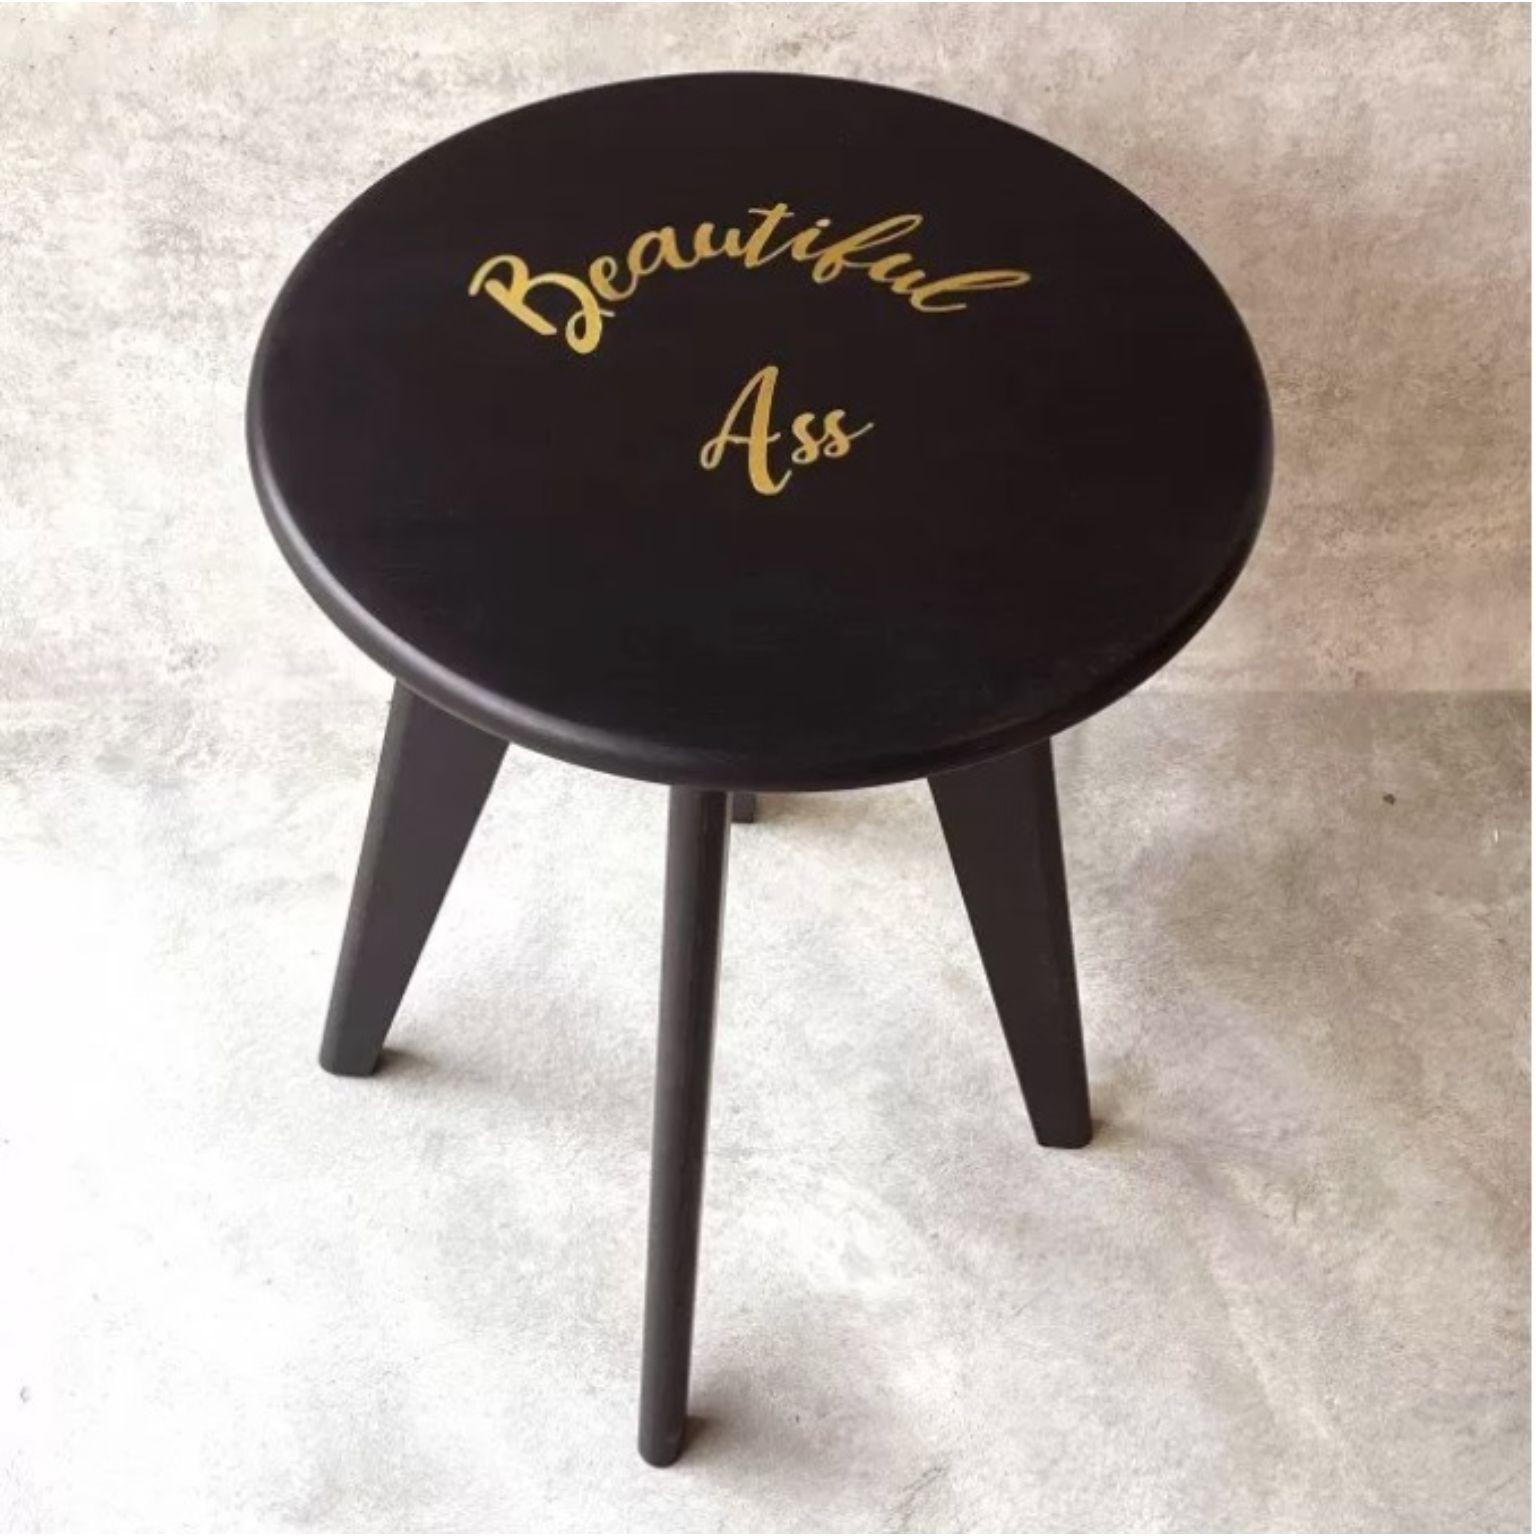 Beautiful Ass Black Stained Ash ASSY Stool by Mademoiselle Jo
Dimensions: Ø 35 x H 43 cm.
Materials: Ash wood and brass inlay.

Available in two wood colors and several designs.  Please contact us.

At the border between design and goldsmithing, the